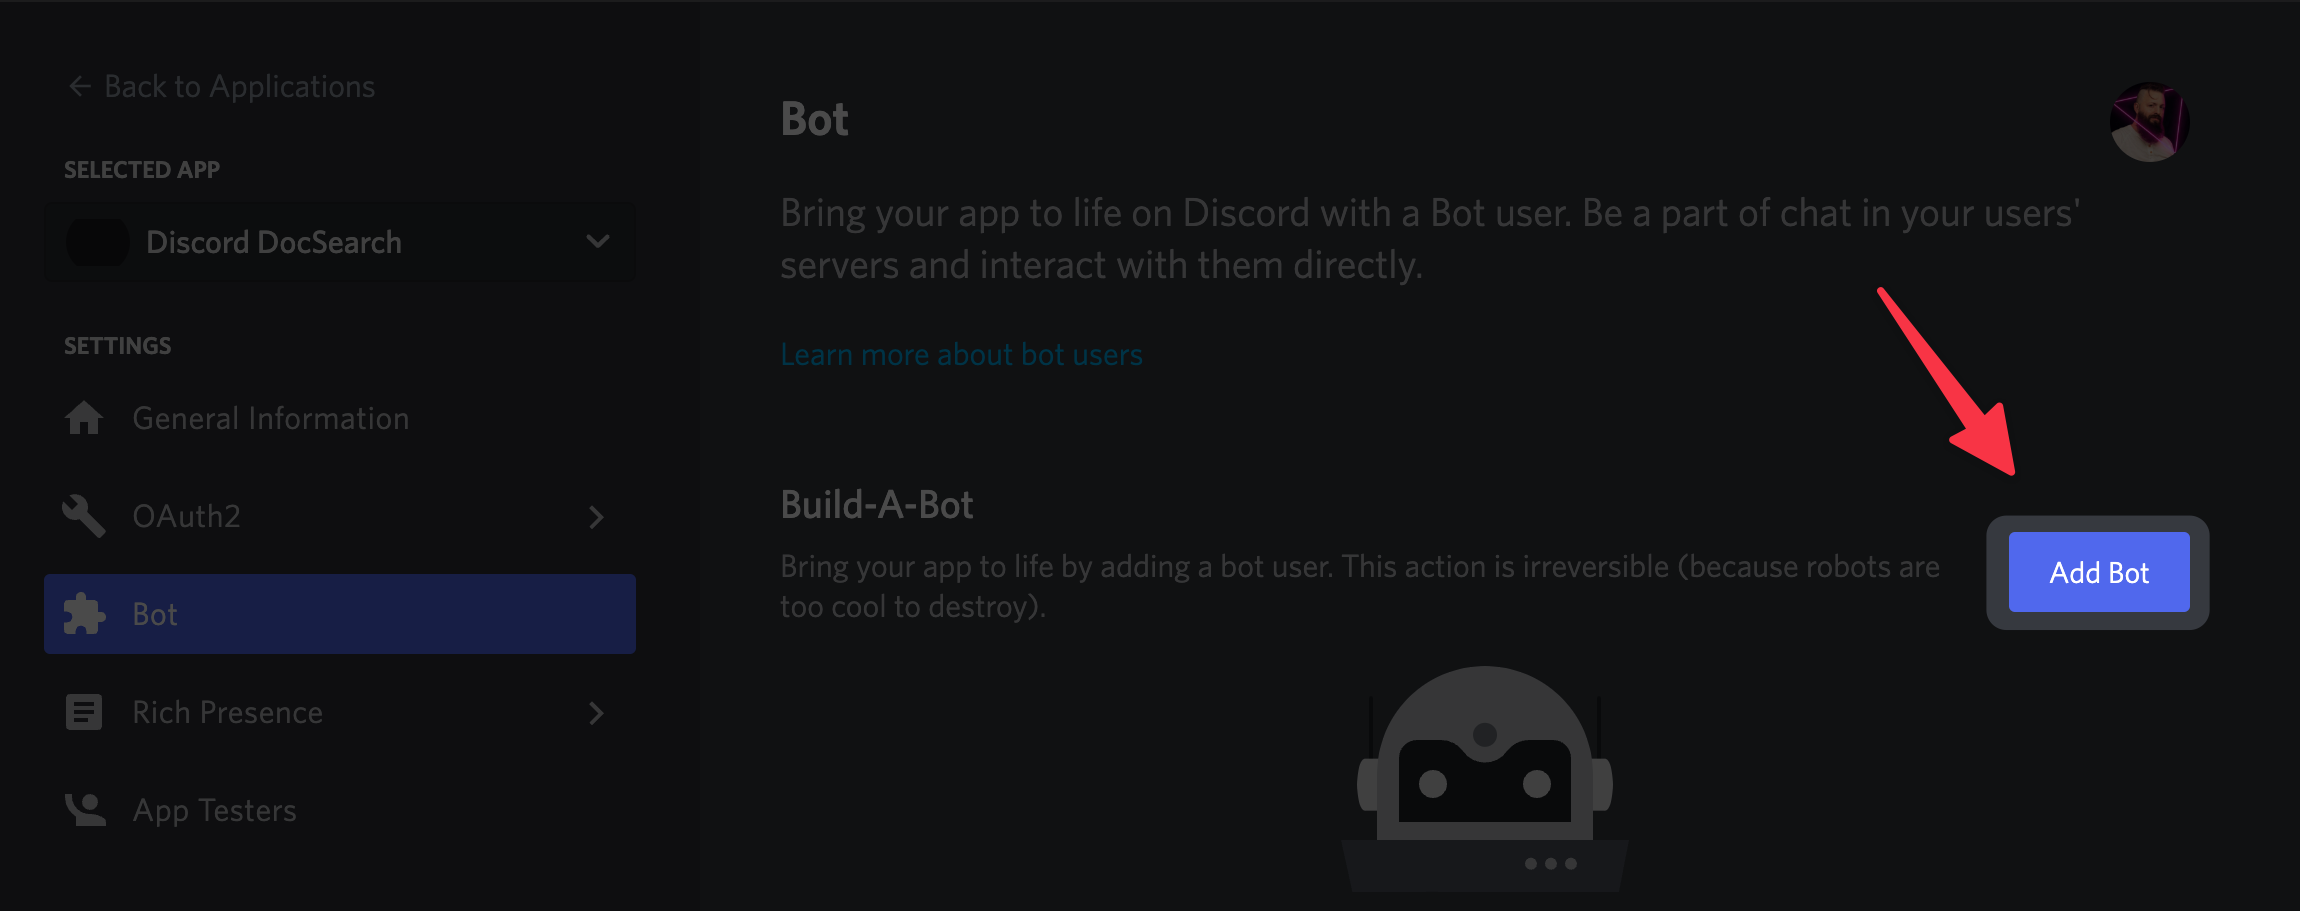 Add Bot to Discord Application